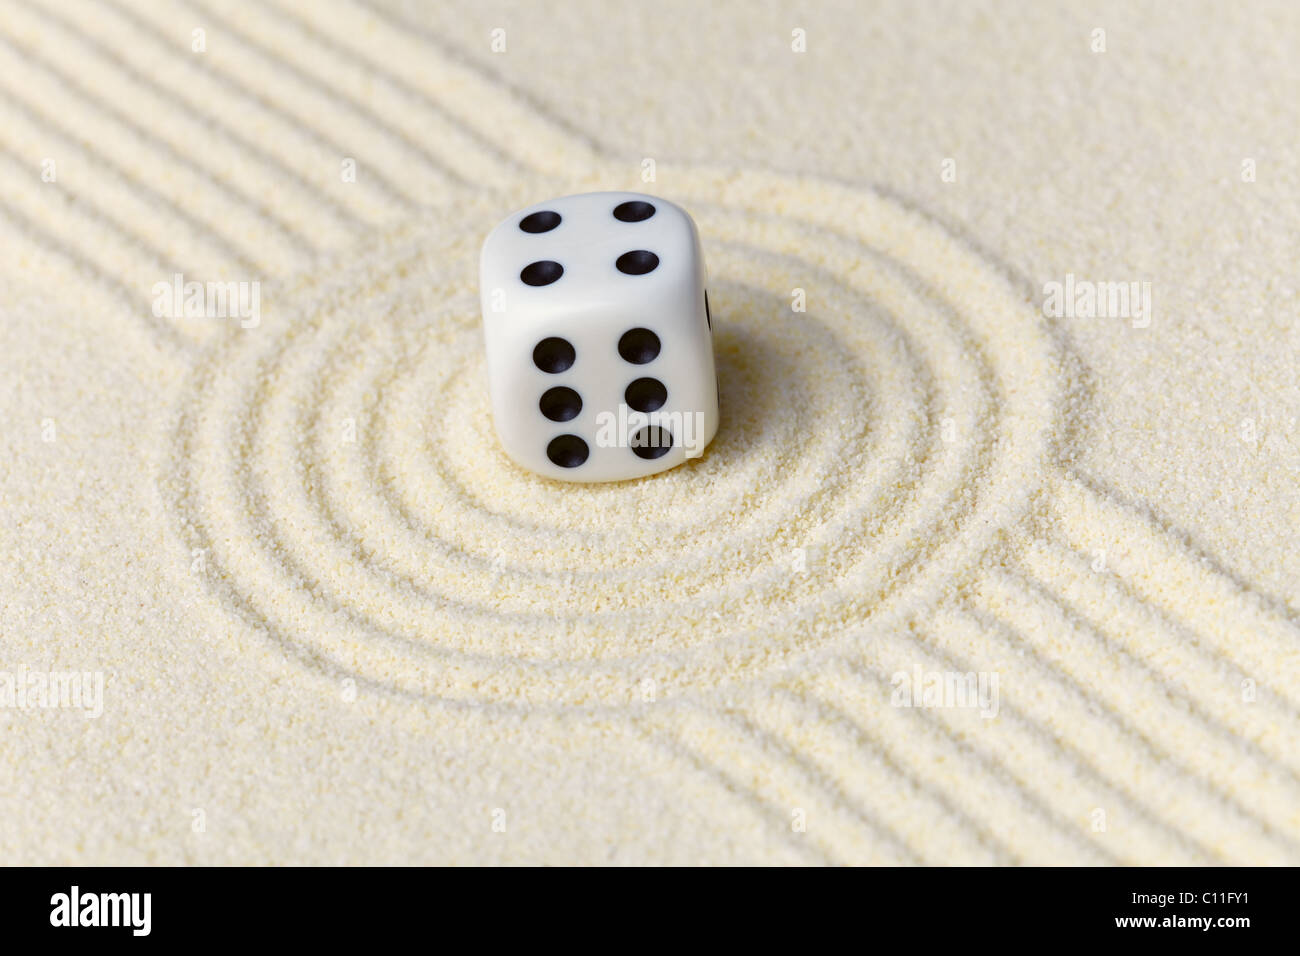 Composition on Zen garden - sand, and dice Stock Photo